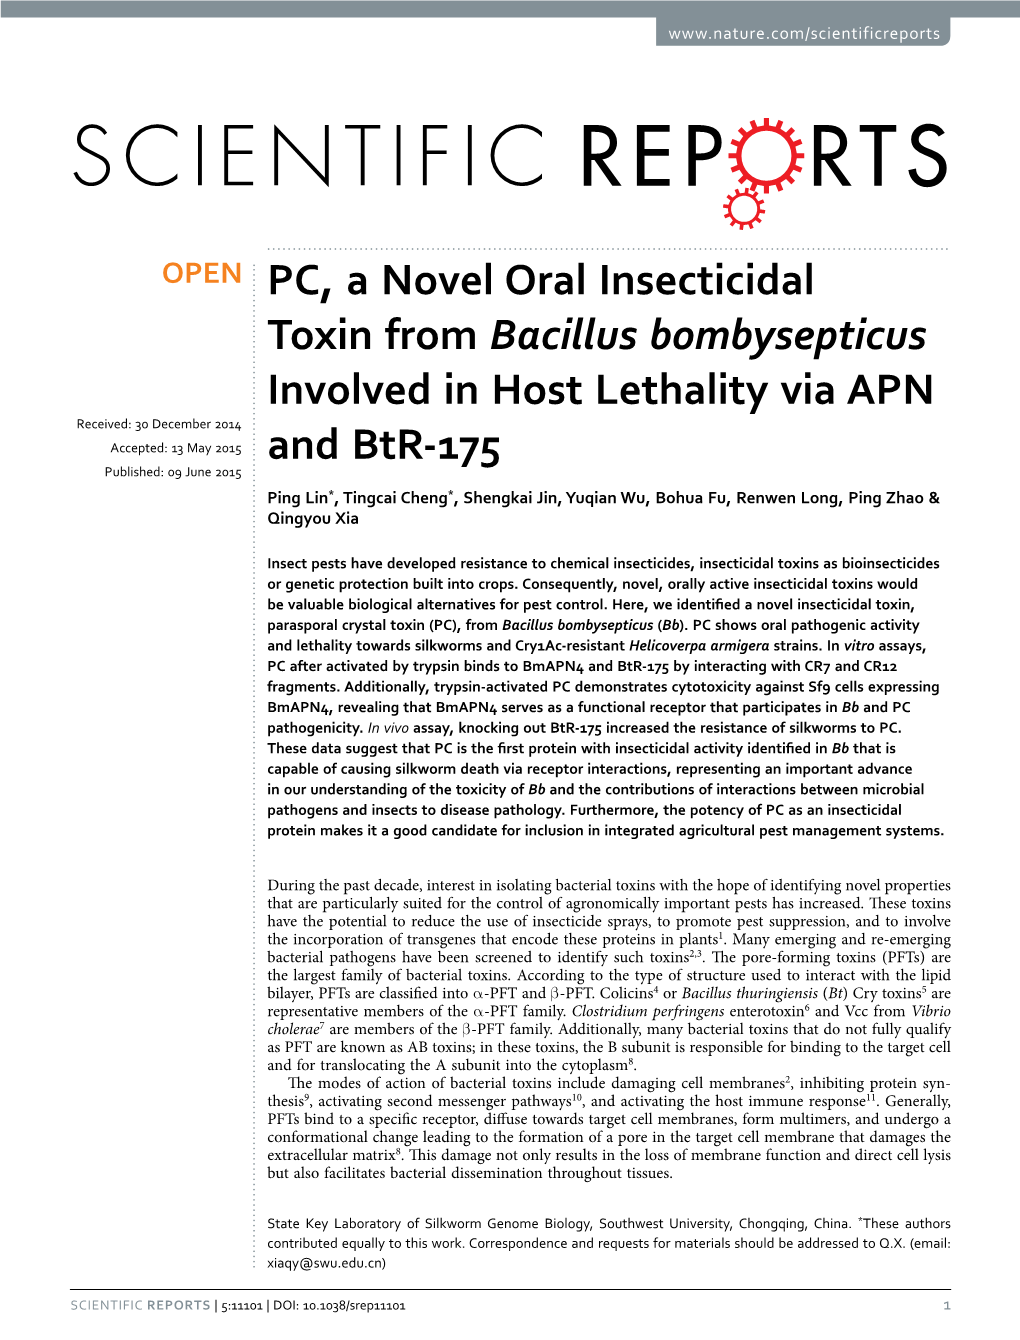 PC, a Novel Oral Insecticidal Toxin from Bacillus Bombysepticus